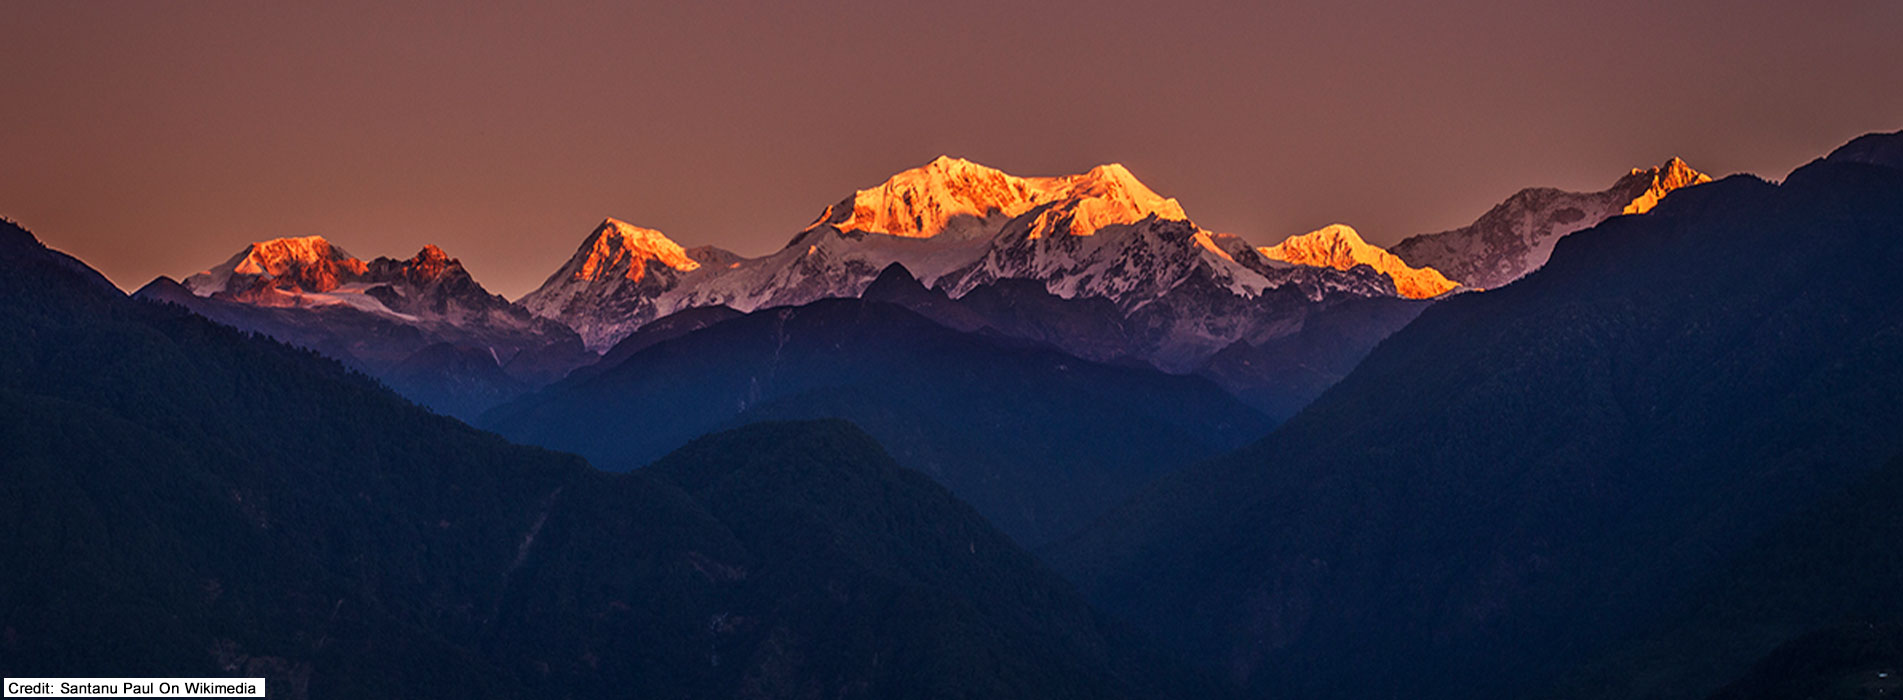 Explore With The Best Sikkim Holiday Packages